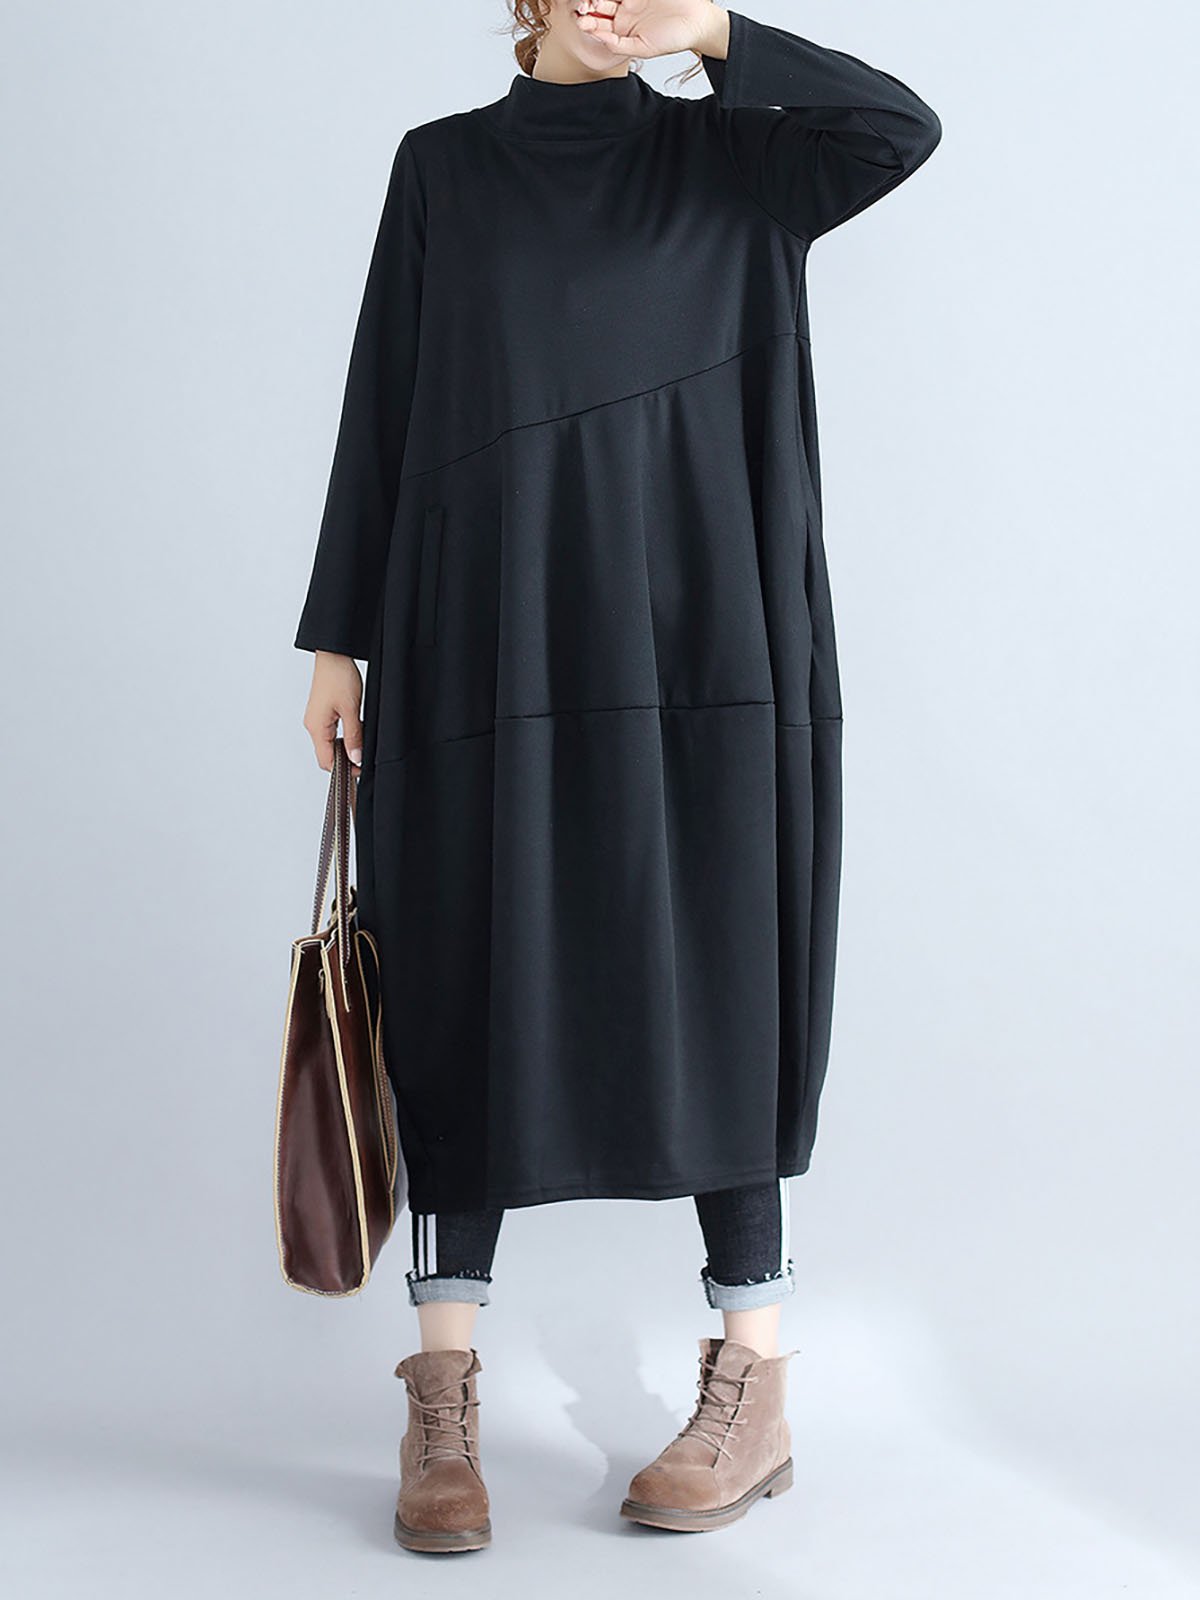 Women Daily Balloon Sleeve Pockets Solid Casual Dress